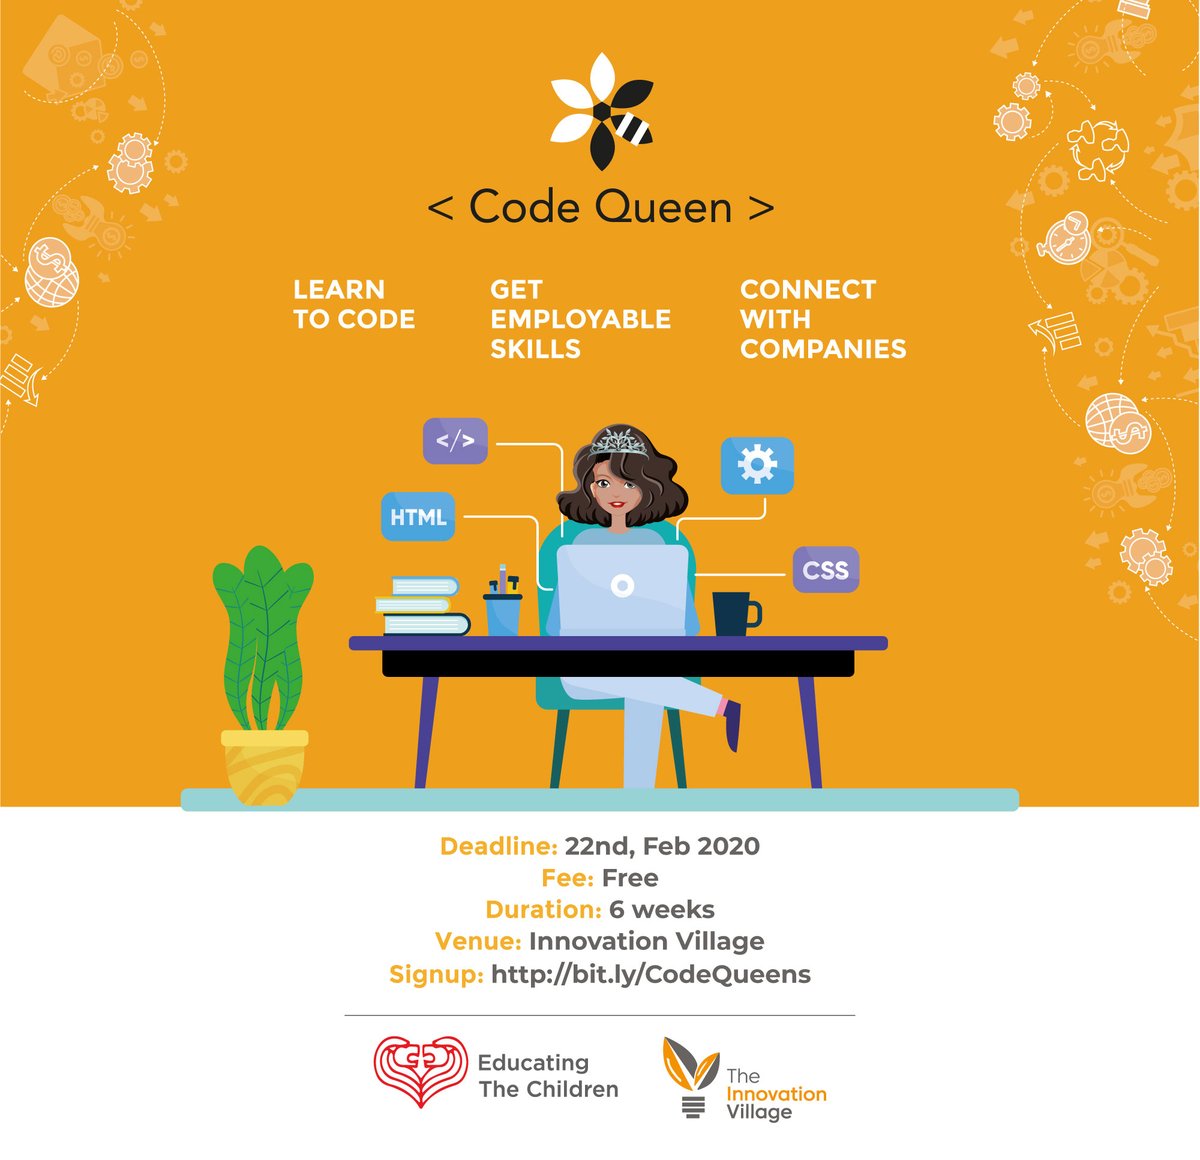 Become the next CodeQueen by signing up for this upcoming Bootcamp starting Mar 2nd, 2020 in collaboration with The Innovation Village Kampala. Just sign by 23rd Feb 2020. #coding,#STEMskills,#connect with companies. It’s absolutely free !!! 

Sign up here bit.ly/CodeQueens